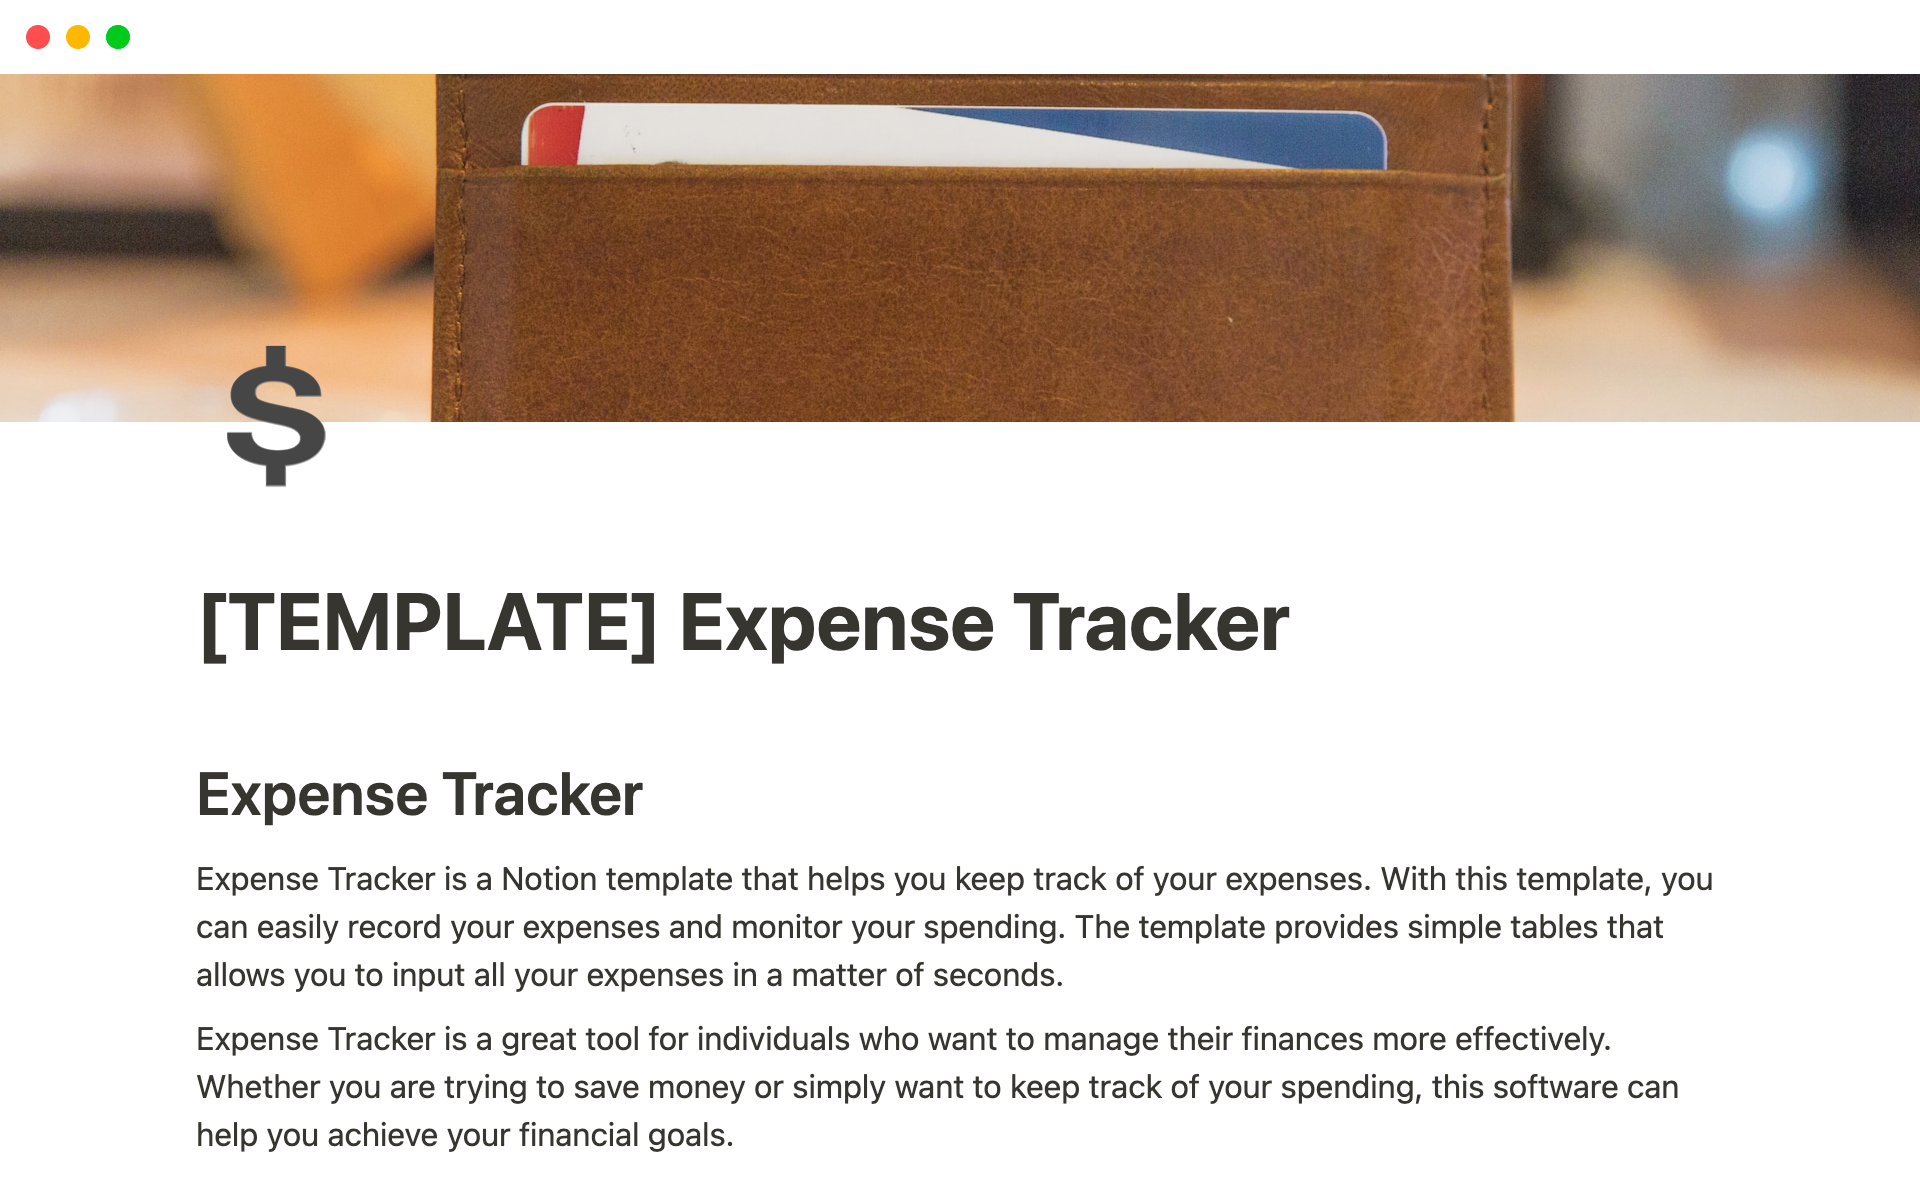 This template makes tracking expenses easier